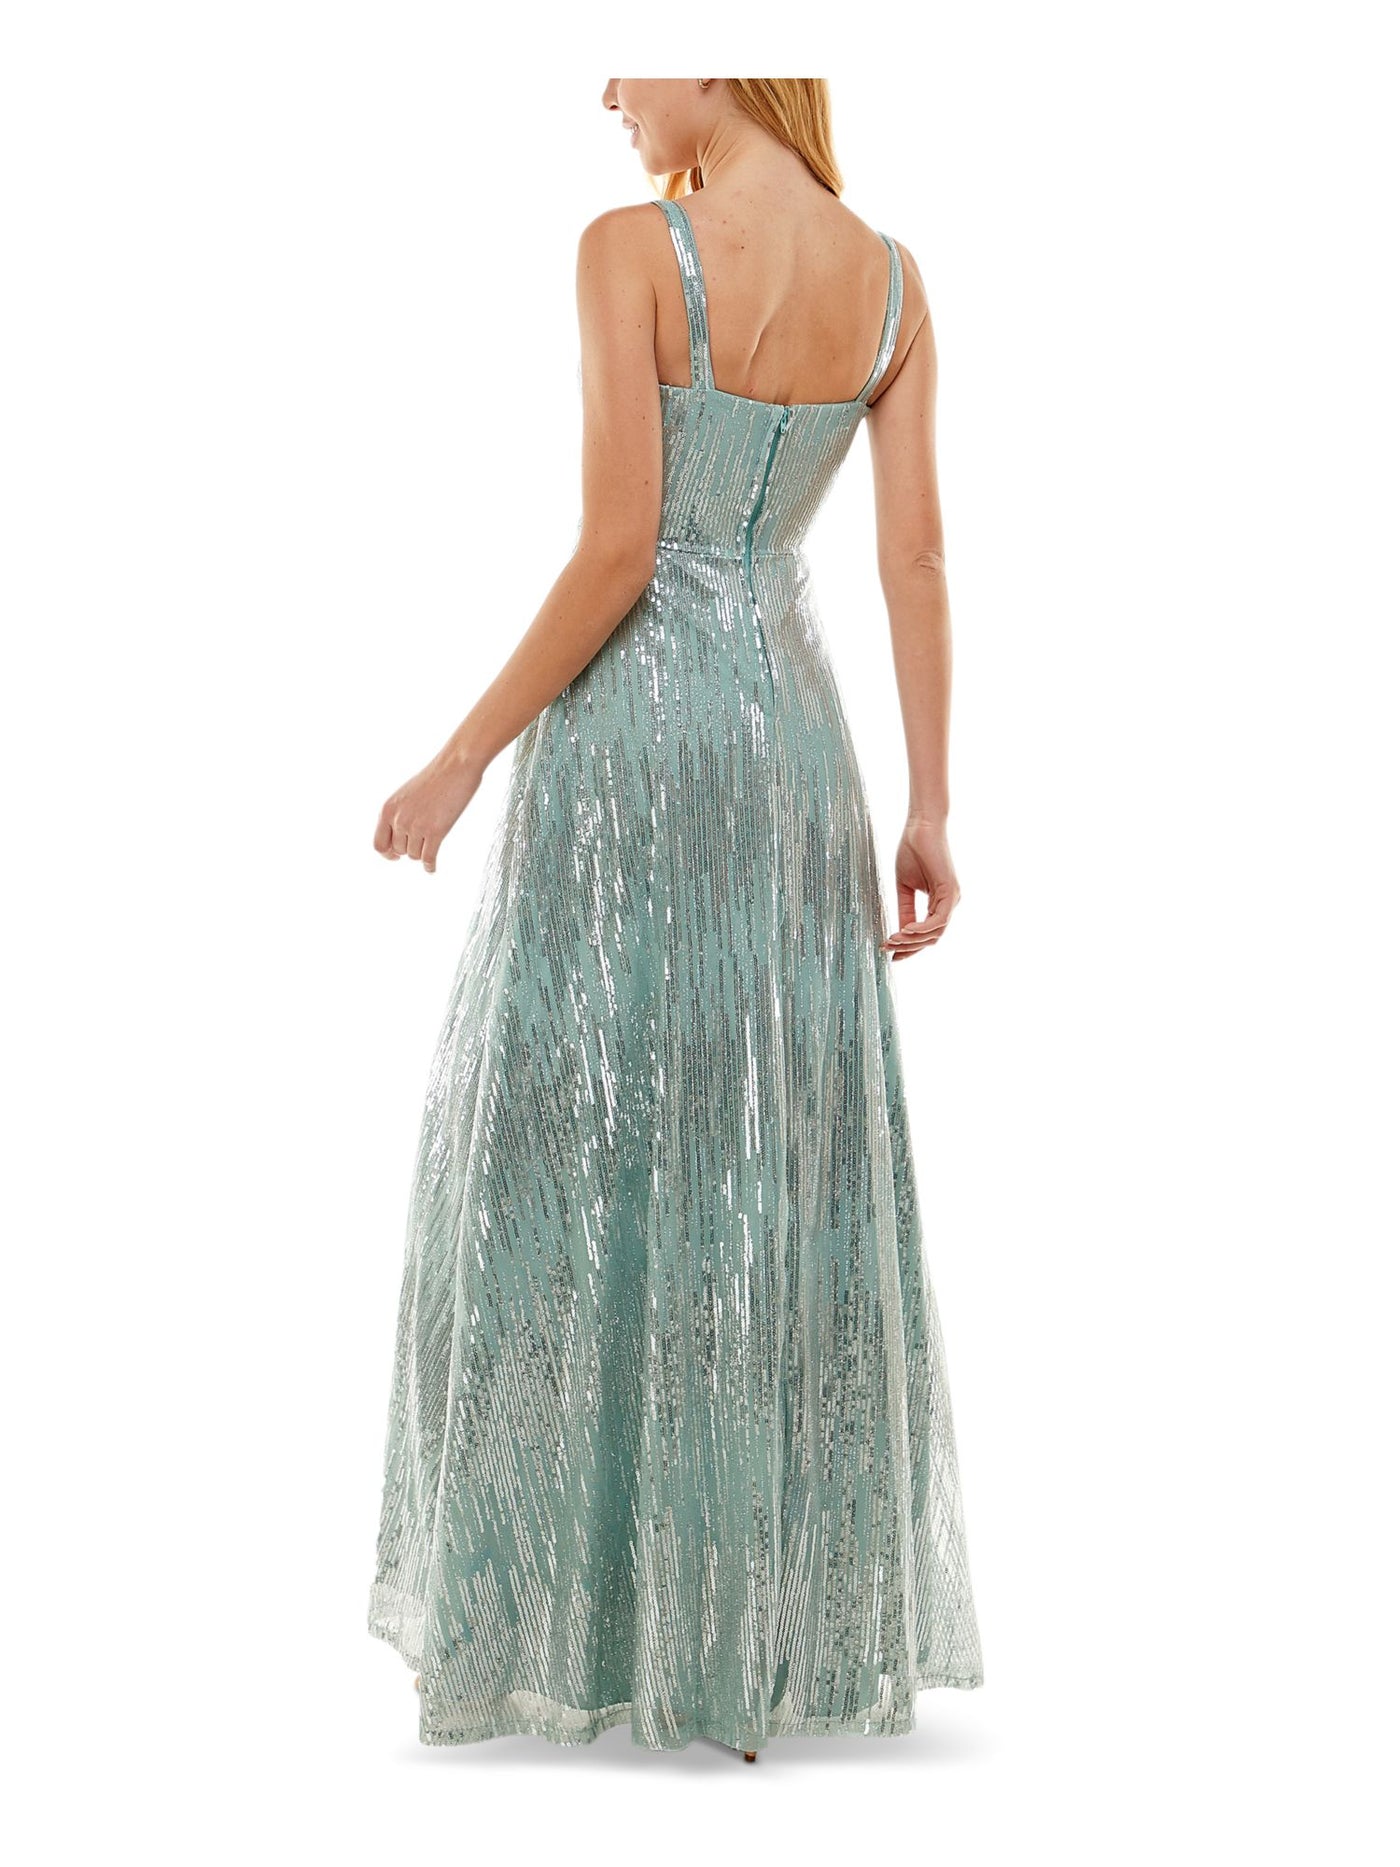 SAY YES TO THE PROM Womens Green Sequined Zippered Lined Sleeveless Square Neck Full-Length Formal Gown Dress Juniors 11